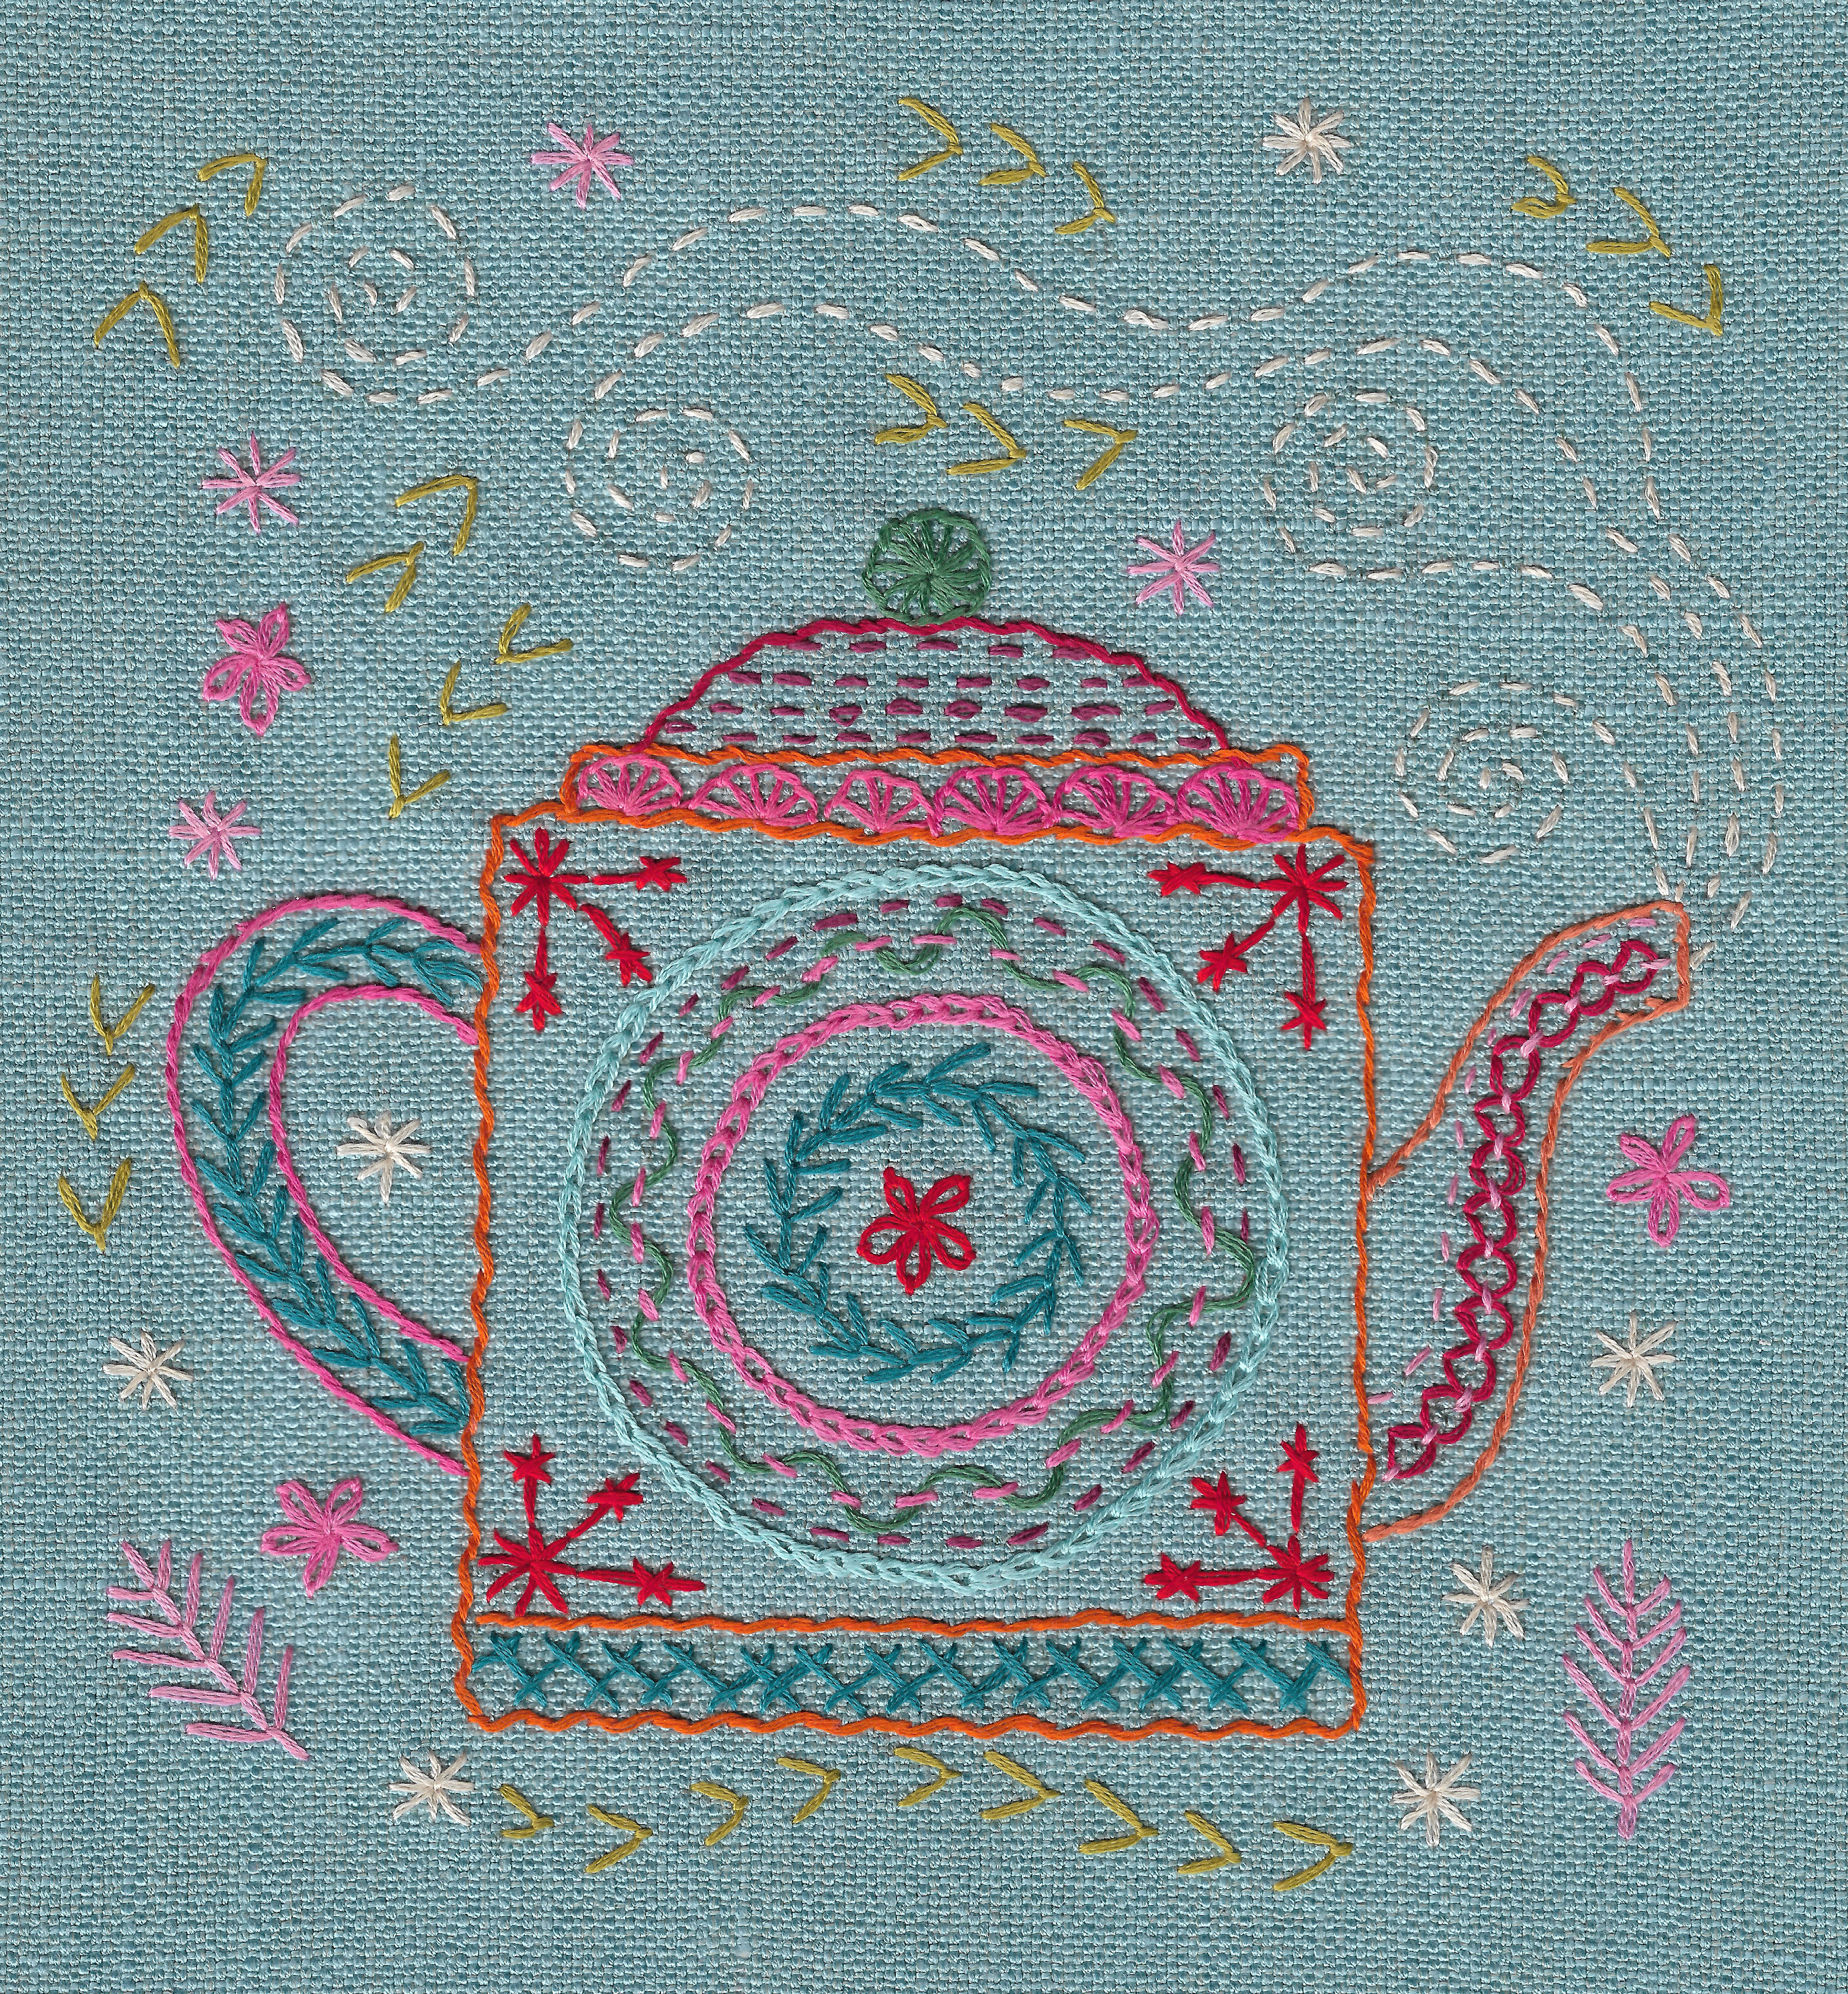 How To Transfer Embroidery Pattern Teapot Iron On Transfer Embroidery Pattern